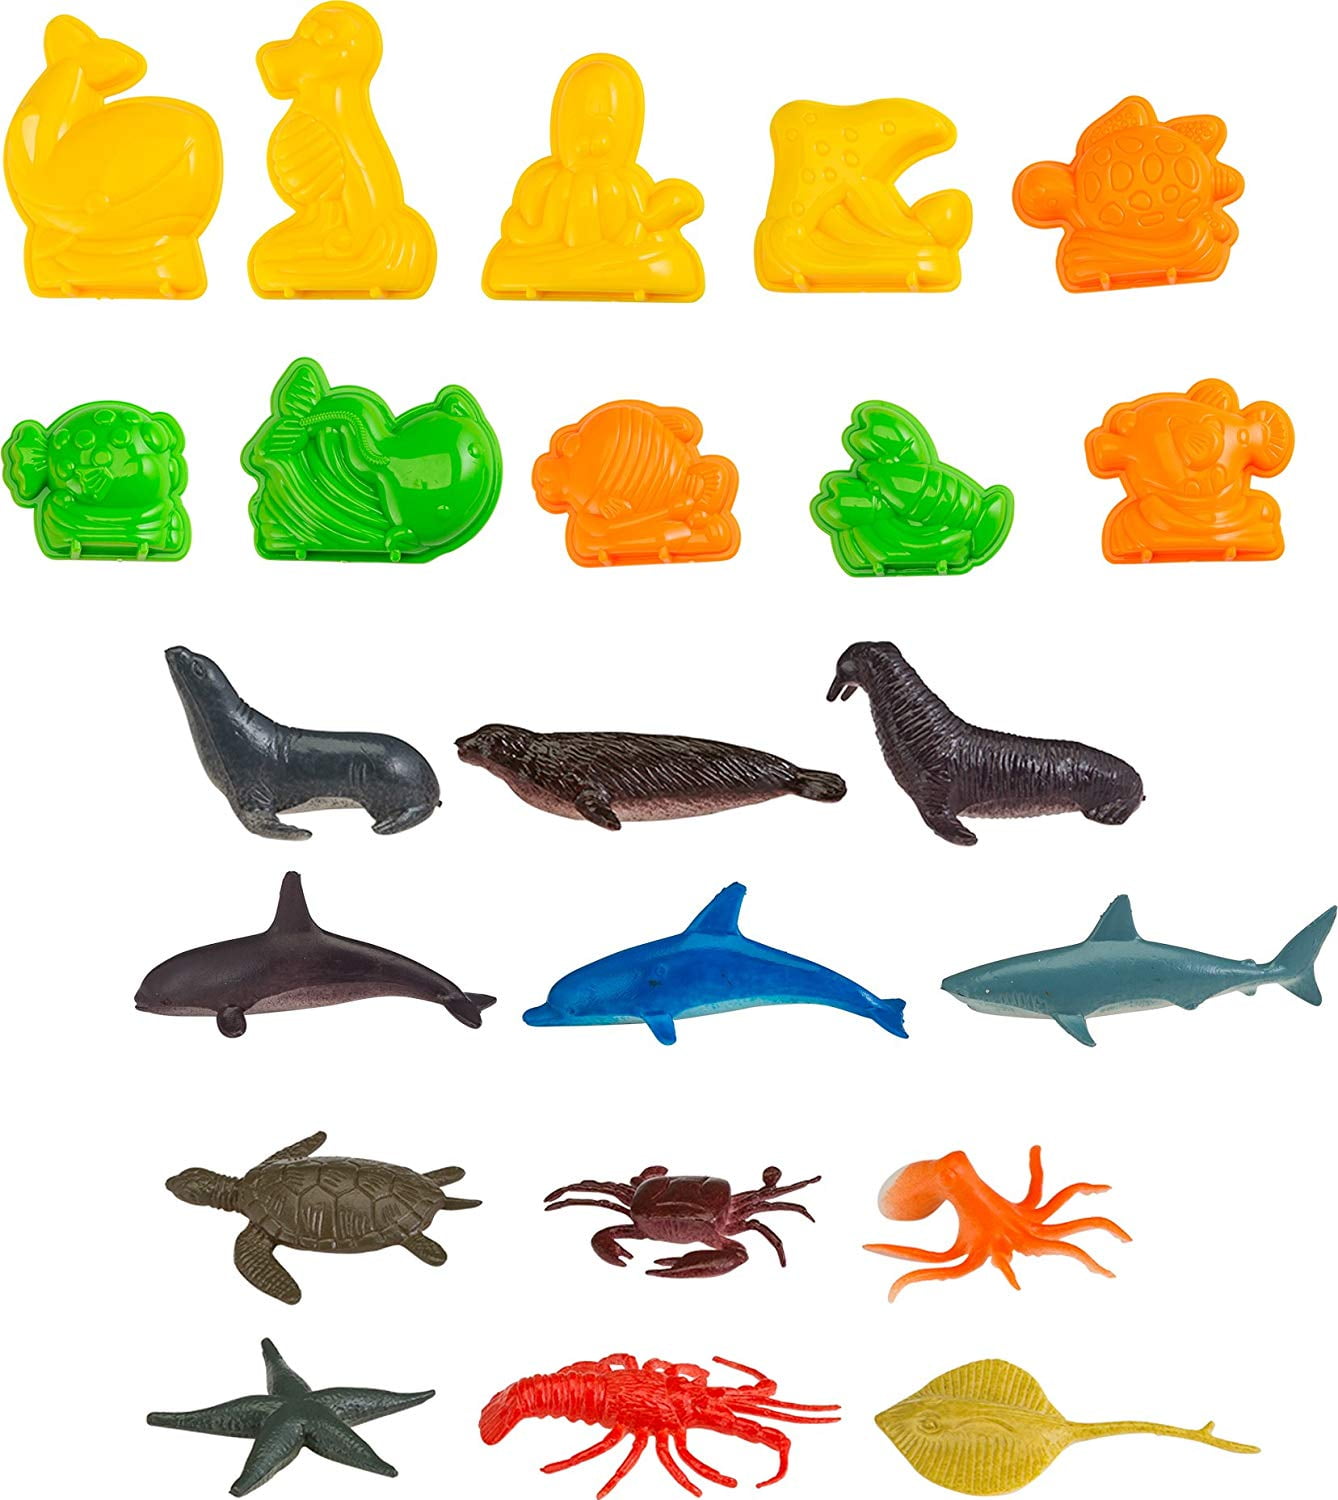 3D Sandbox Sea Creatures Edition Set Includes: 1 Pound Moldable Indoor Play  Sand, Shaping Molds, Sea Figures and 3D Tray, Cool Sand is moldable.., By  